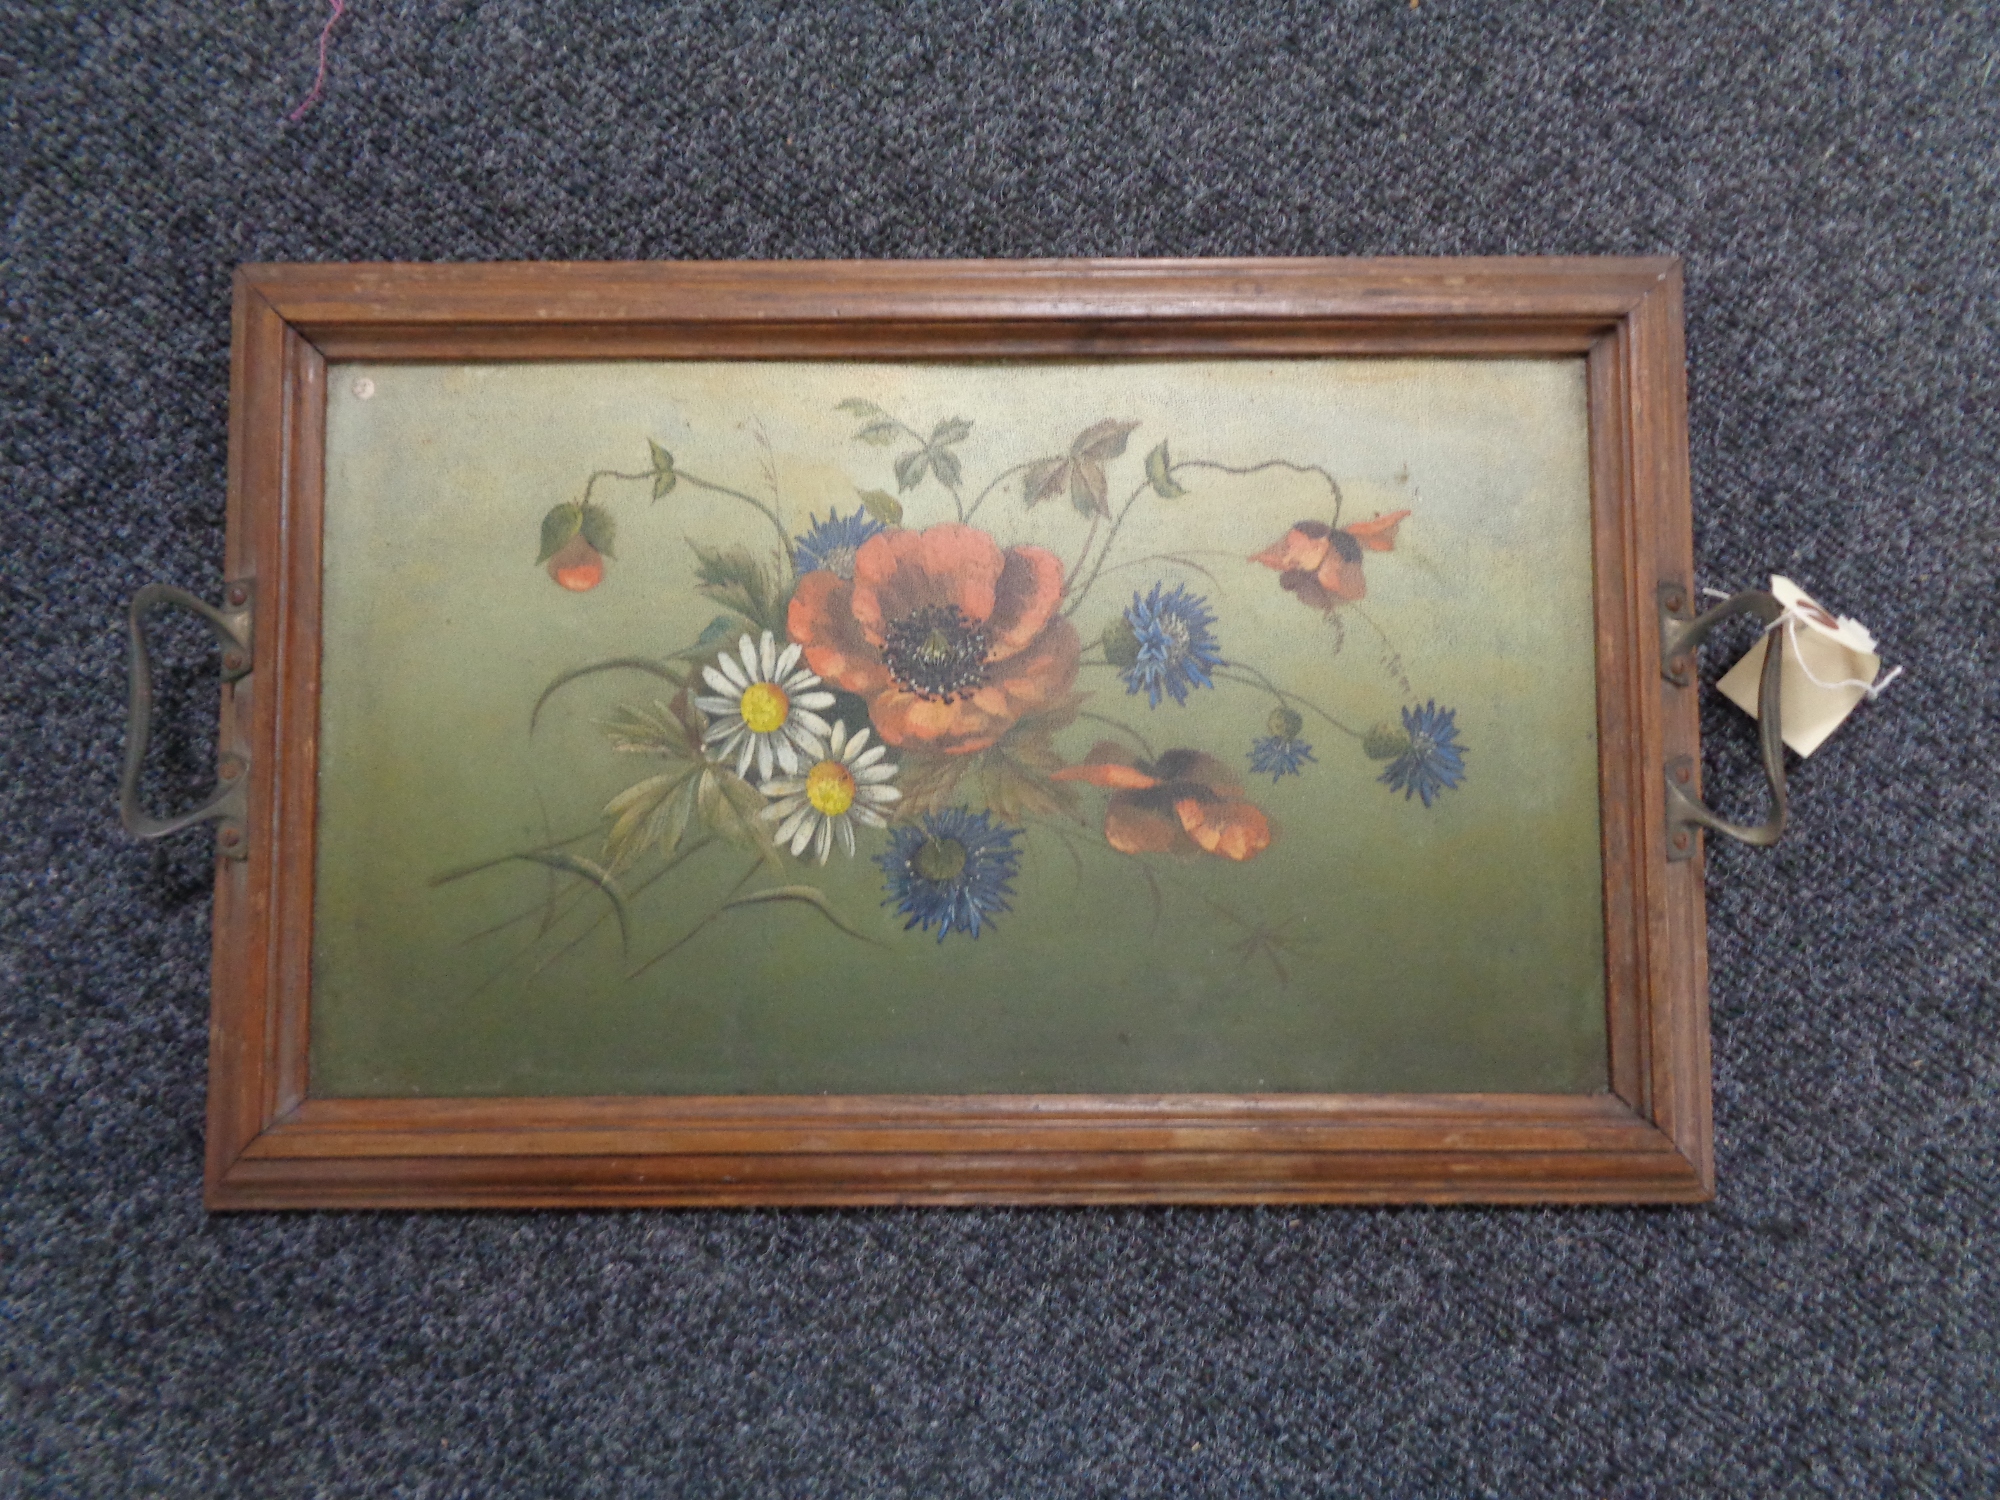 A wood framed twin handled serving tray hand painted with flowers